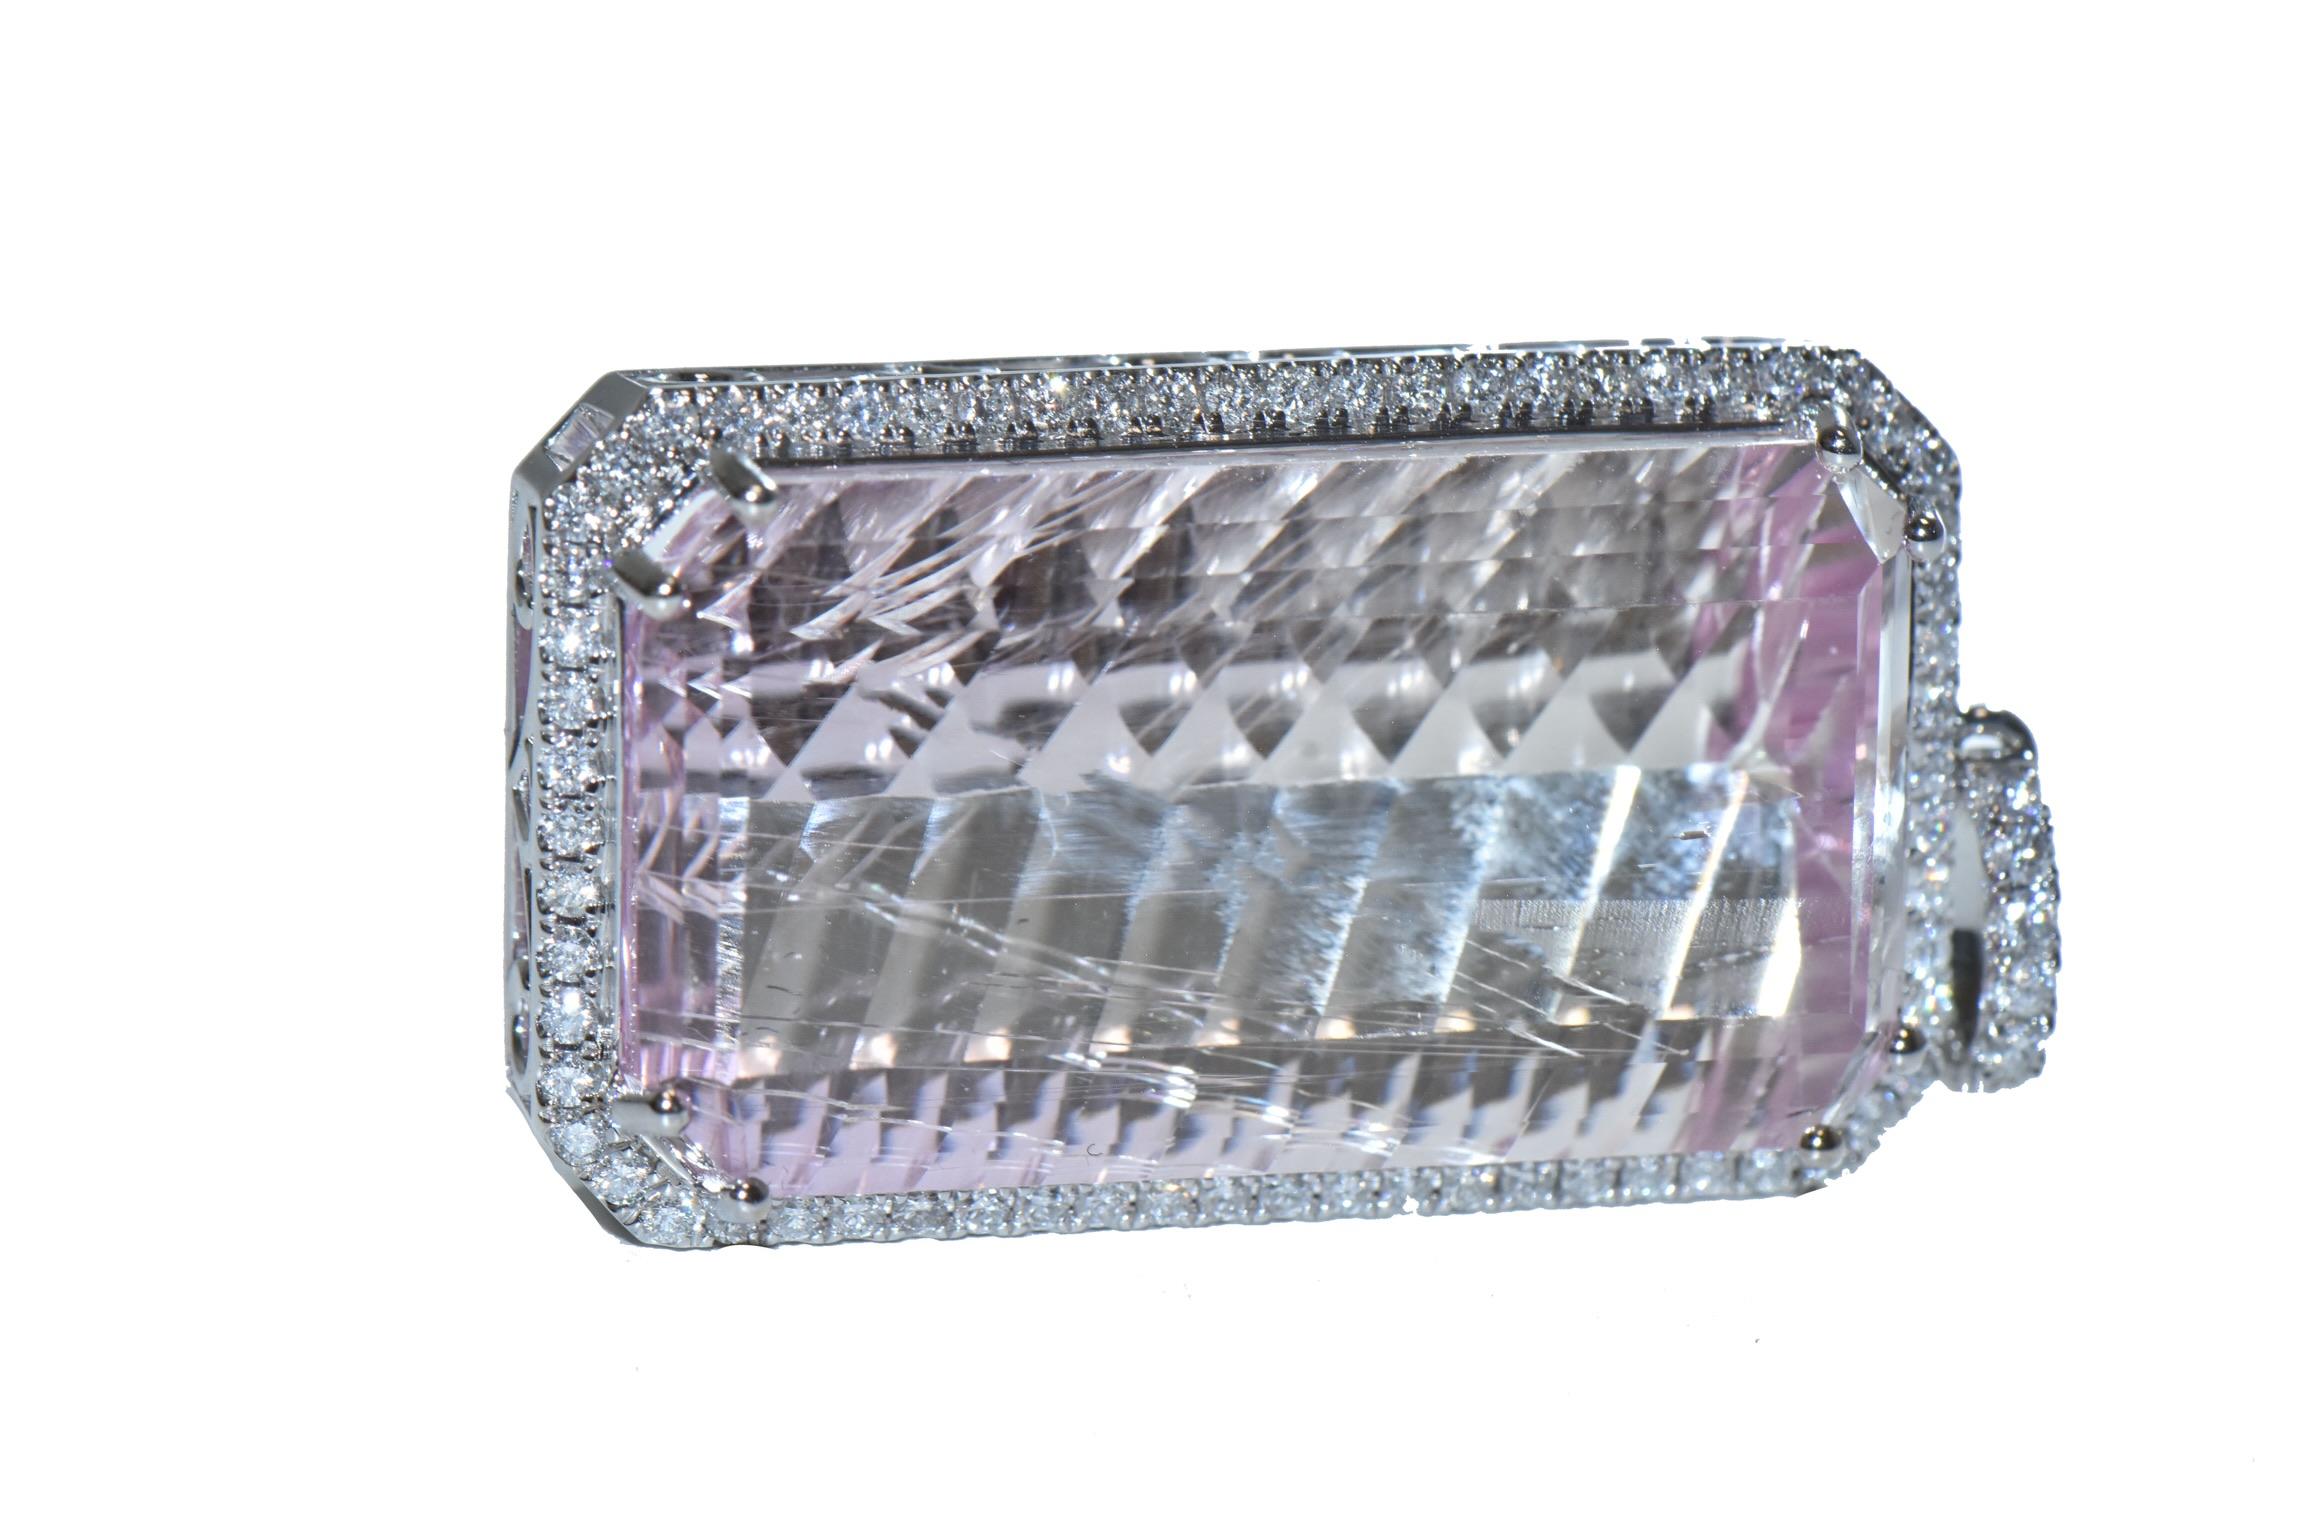 59.29 Carat Emerald Cut Kunzite Pendant with a beautiful Diamond Halo

Historically, kunzite was mainly used for ornamental purposes. Its exquisite color and transparency made it a sought-after gemstone for jewelry, especially during the Art Nouveau